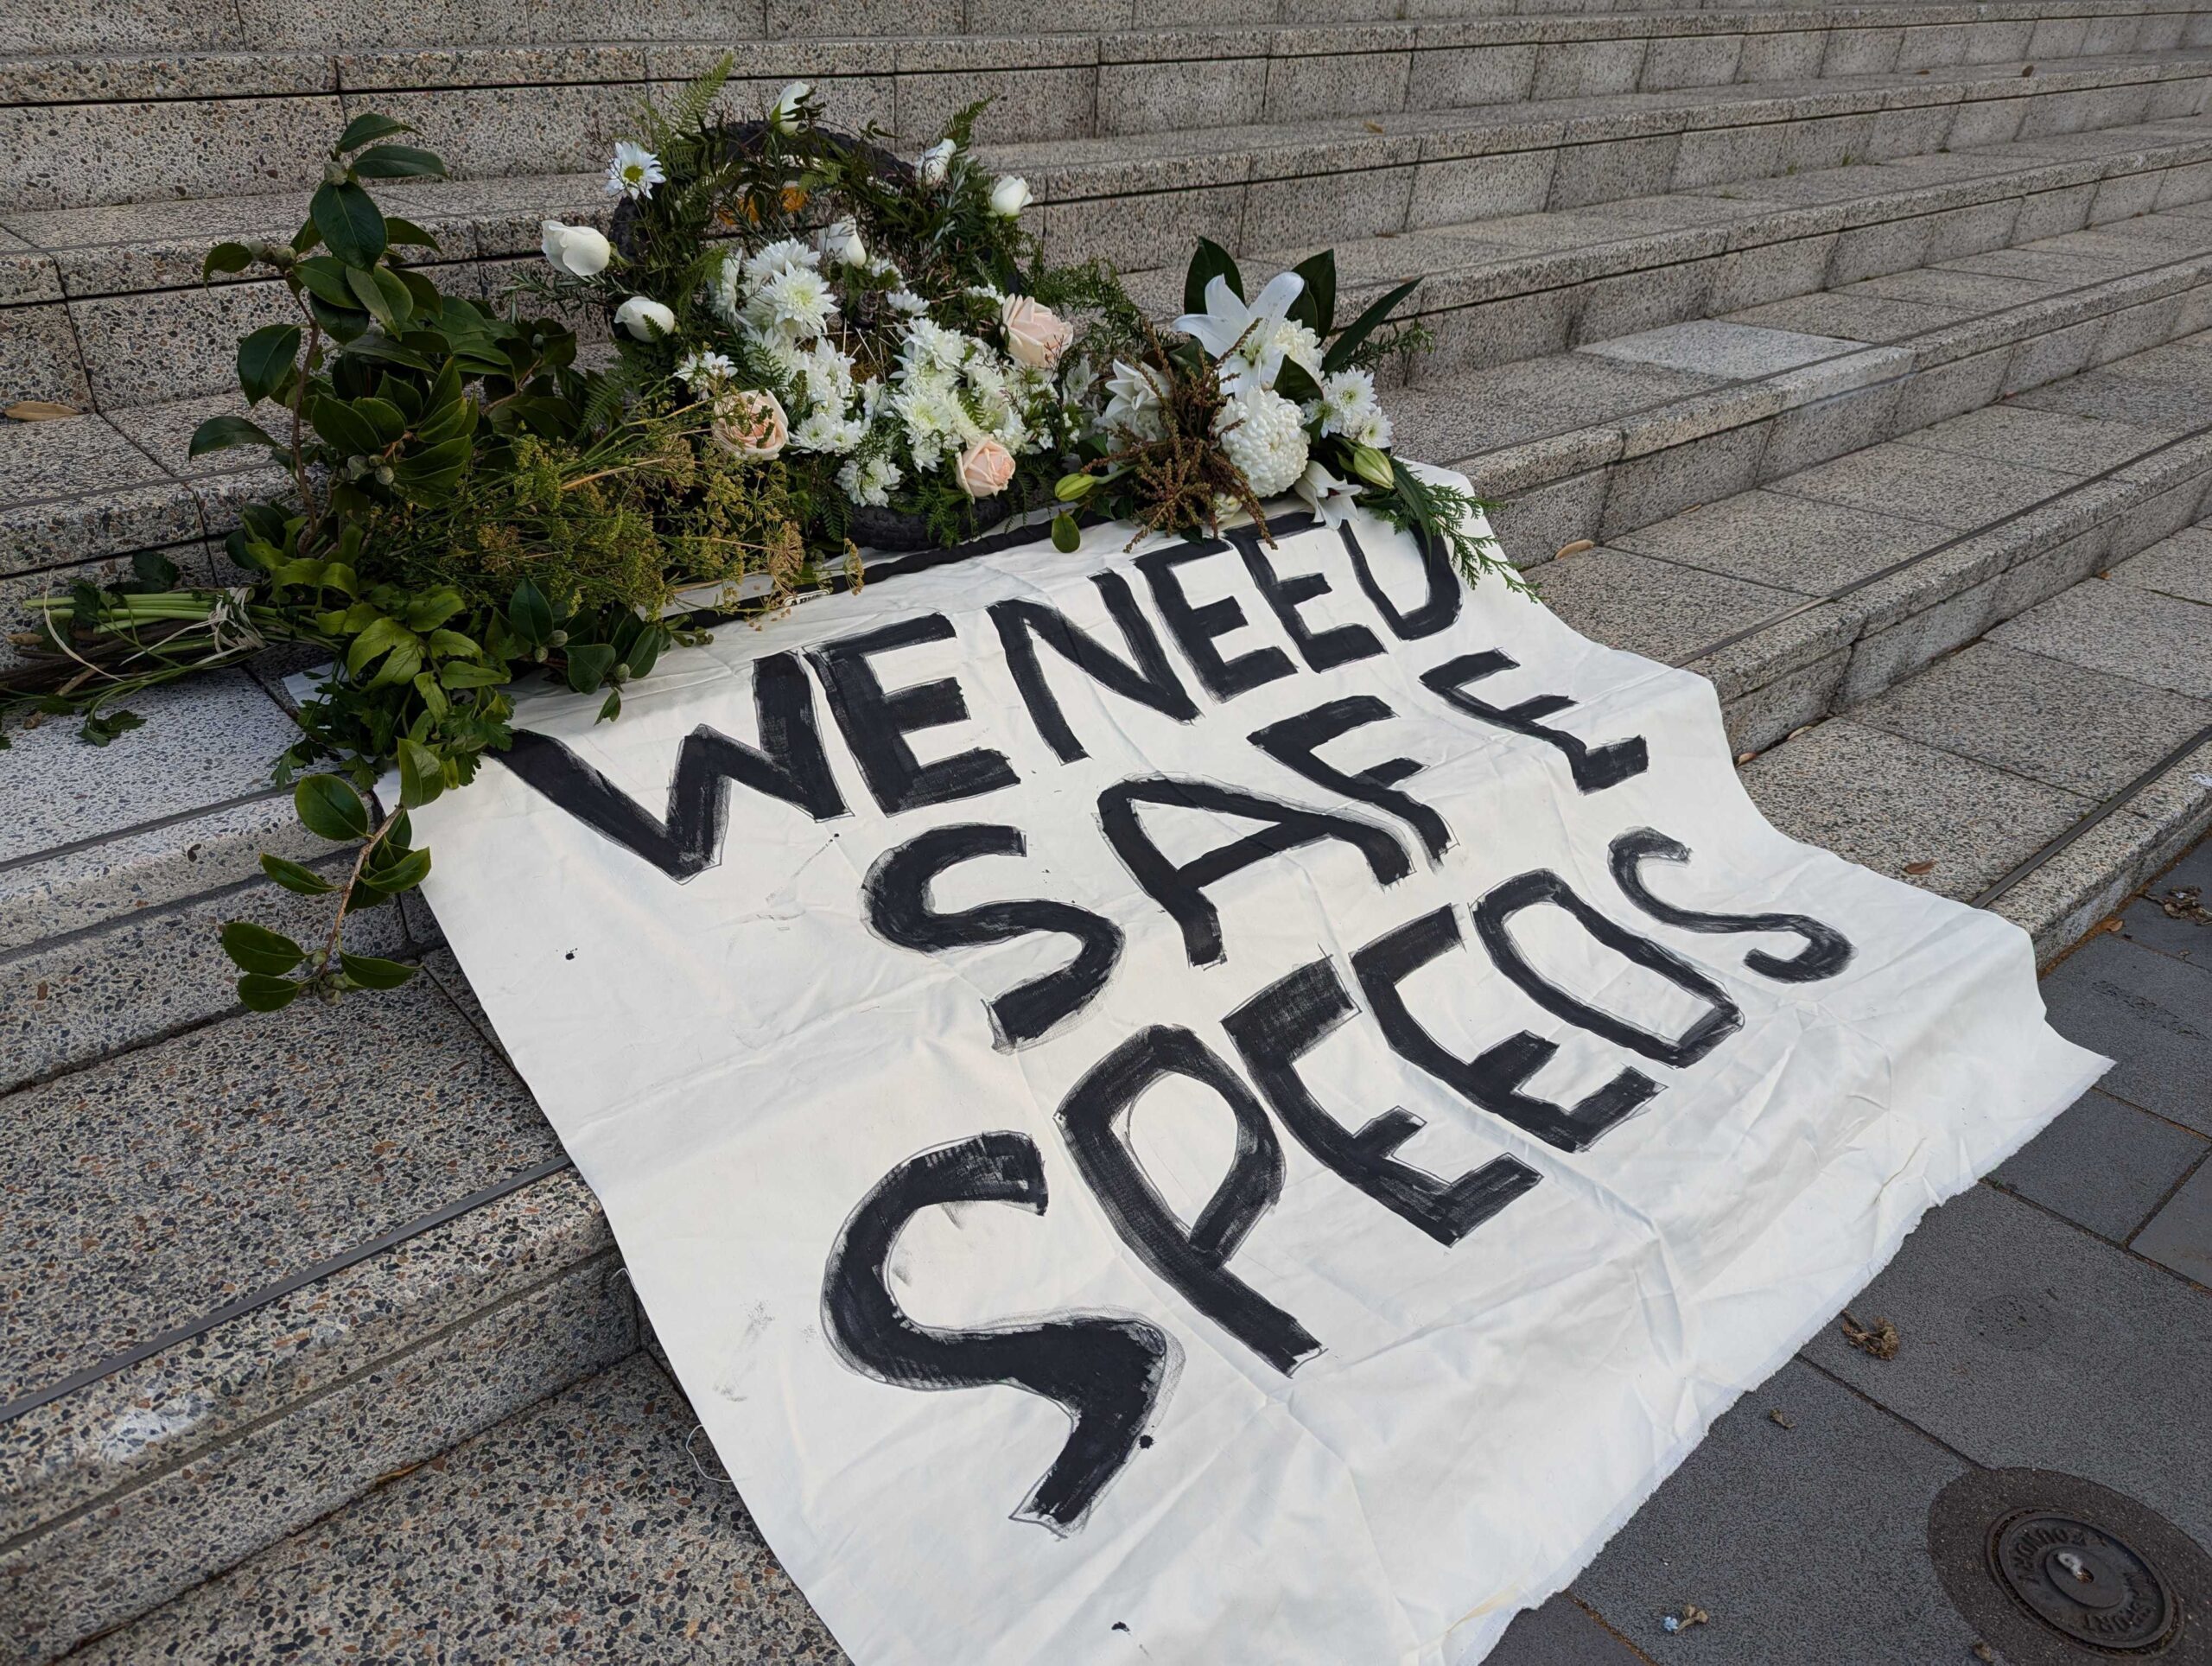 A wreath on steps with a sign "we need safe speeds"